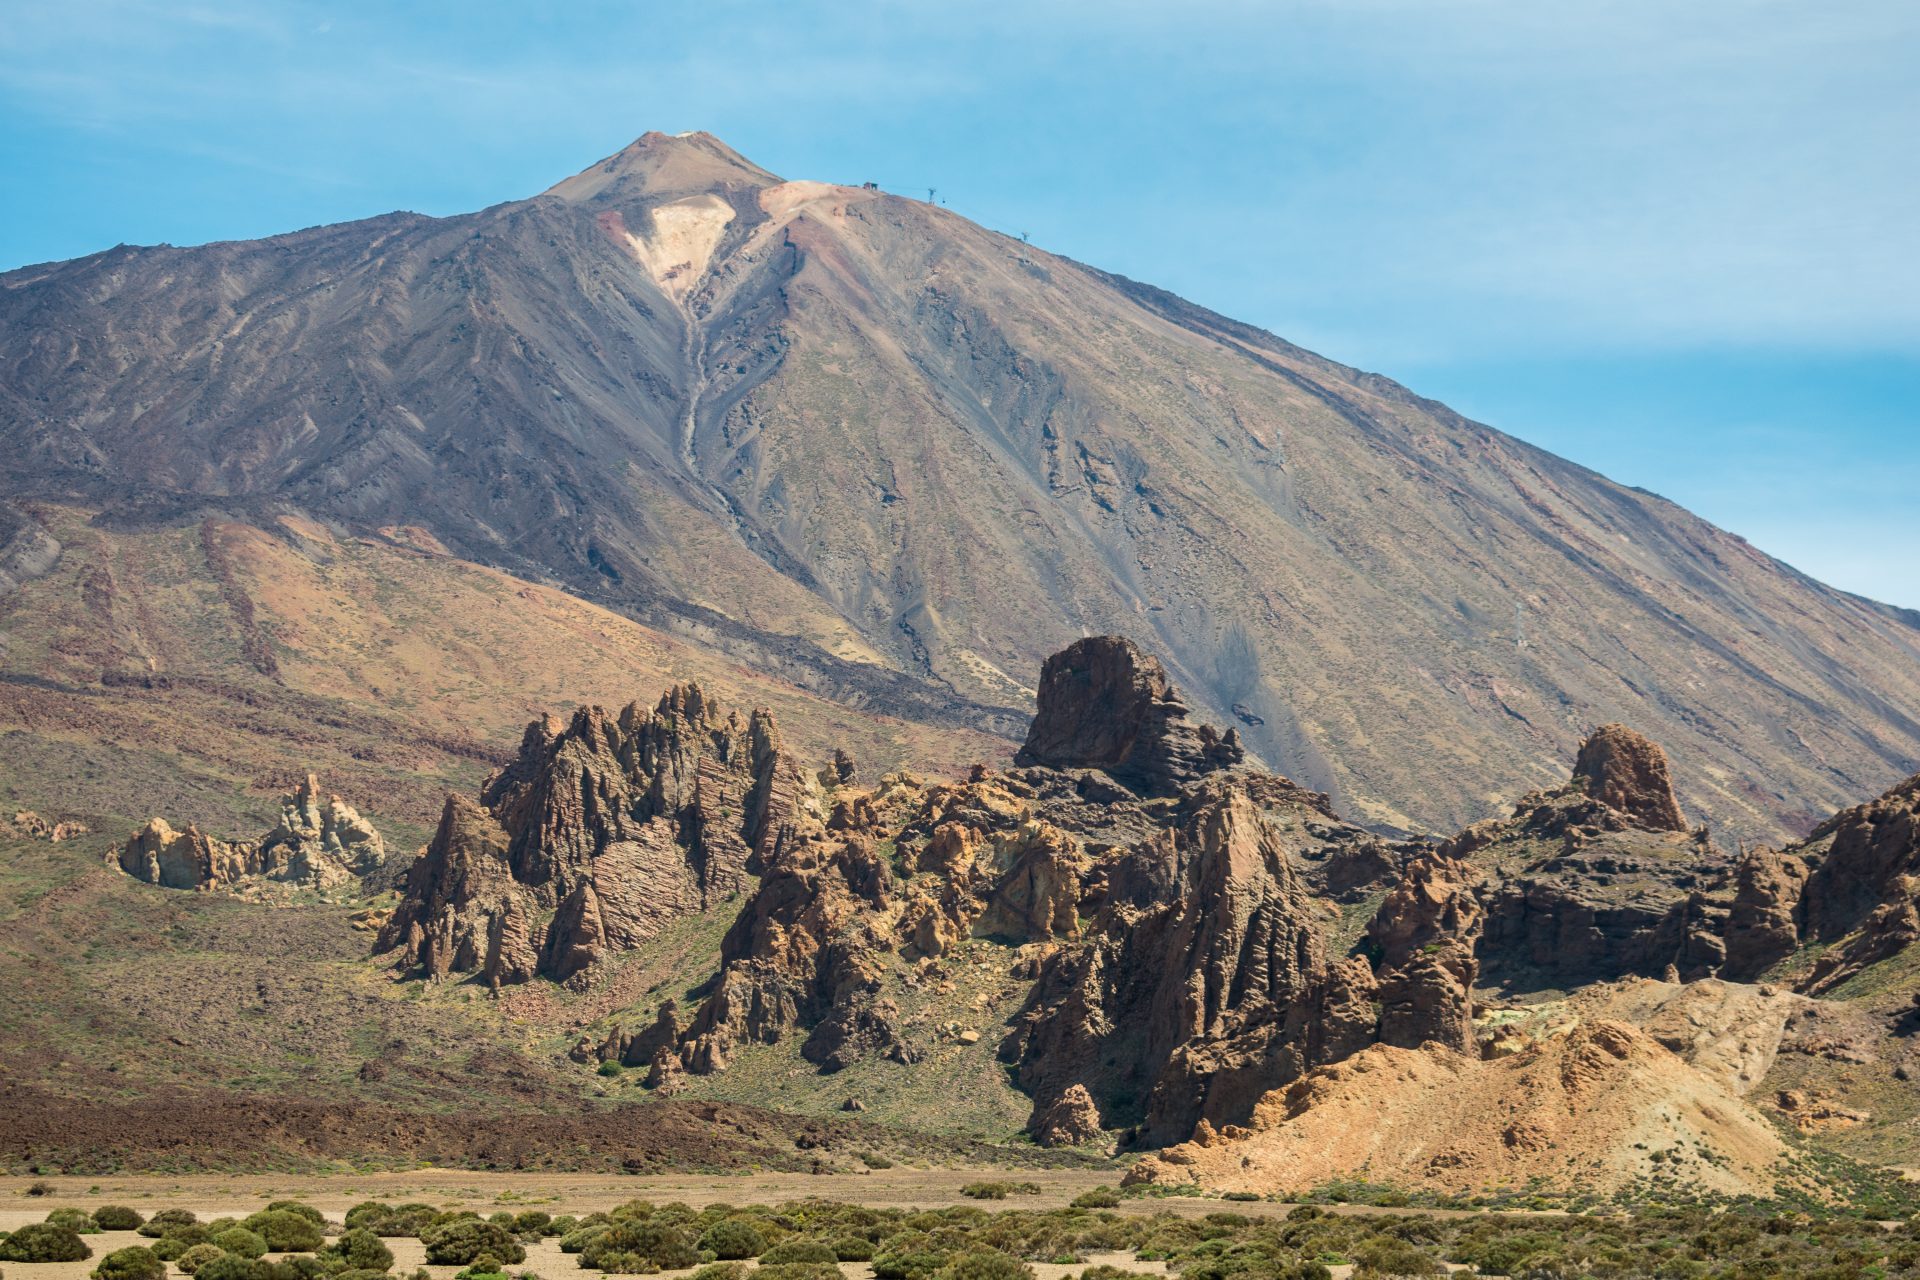 <p>The Teide Volcano National Park is located on the island of Tenerife, in the Canary Islands. Its various hiking trails offer spectacular panoramas with abundant vegetation in certain parts, but also rocky landscapes straight out of a science fiction film.</p>